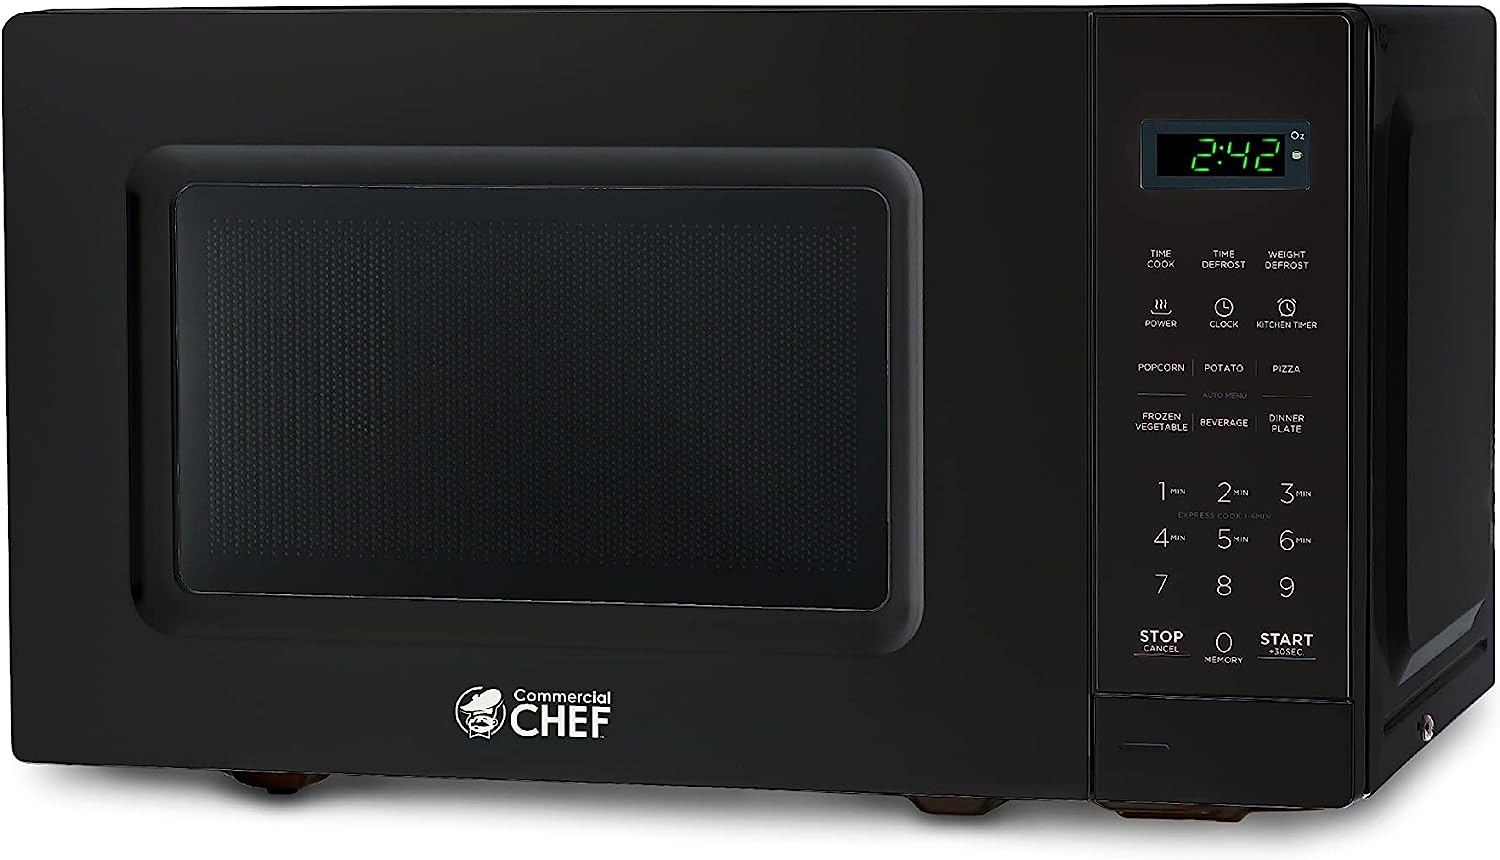 COMMERCIAL CHEF Small Microwave